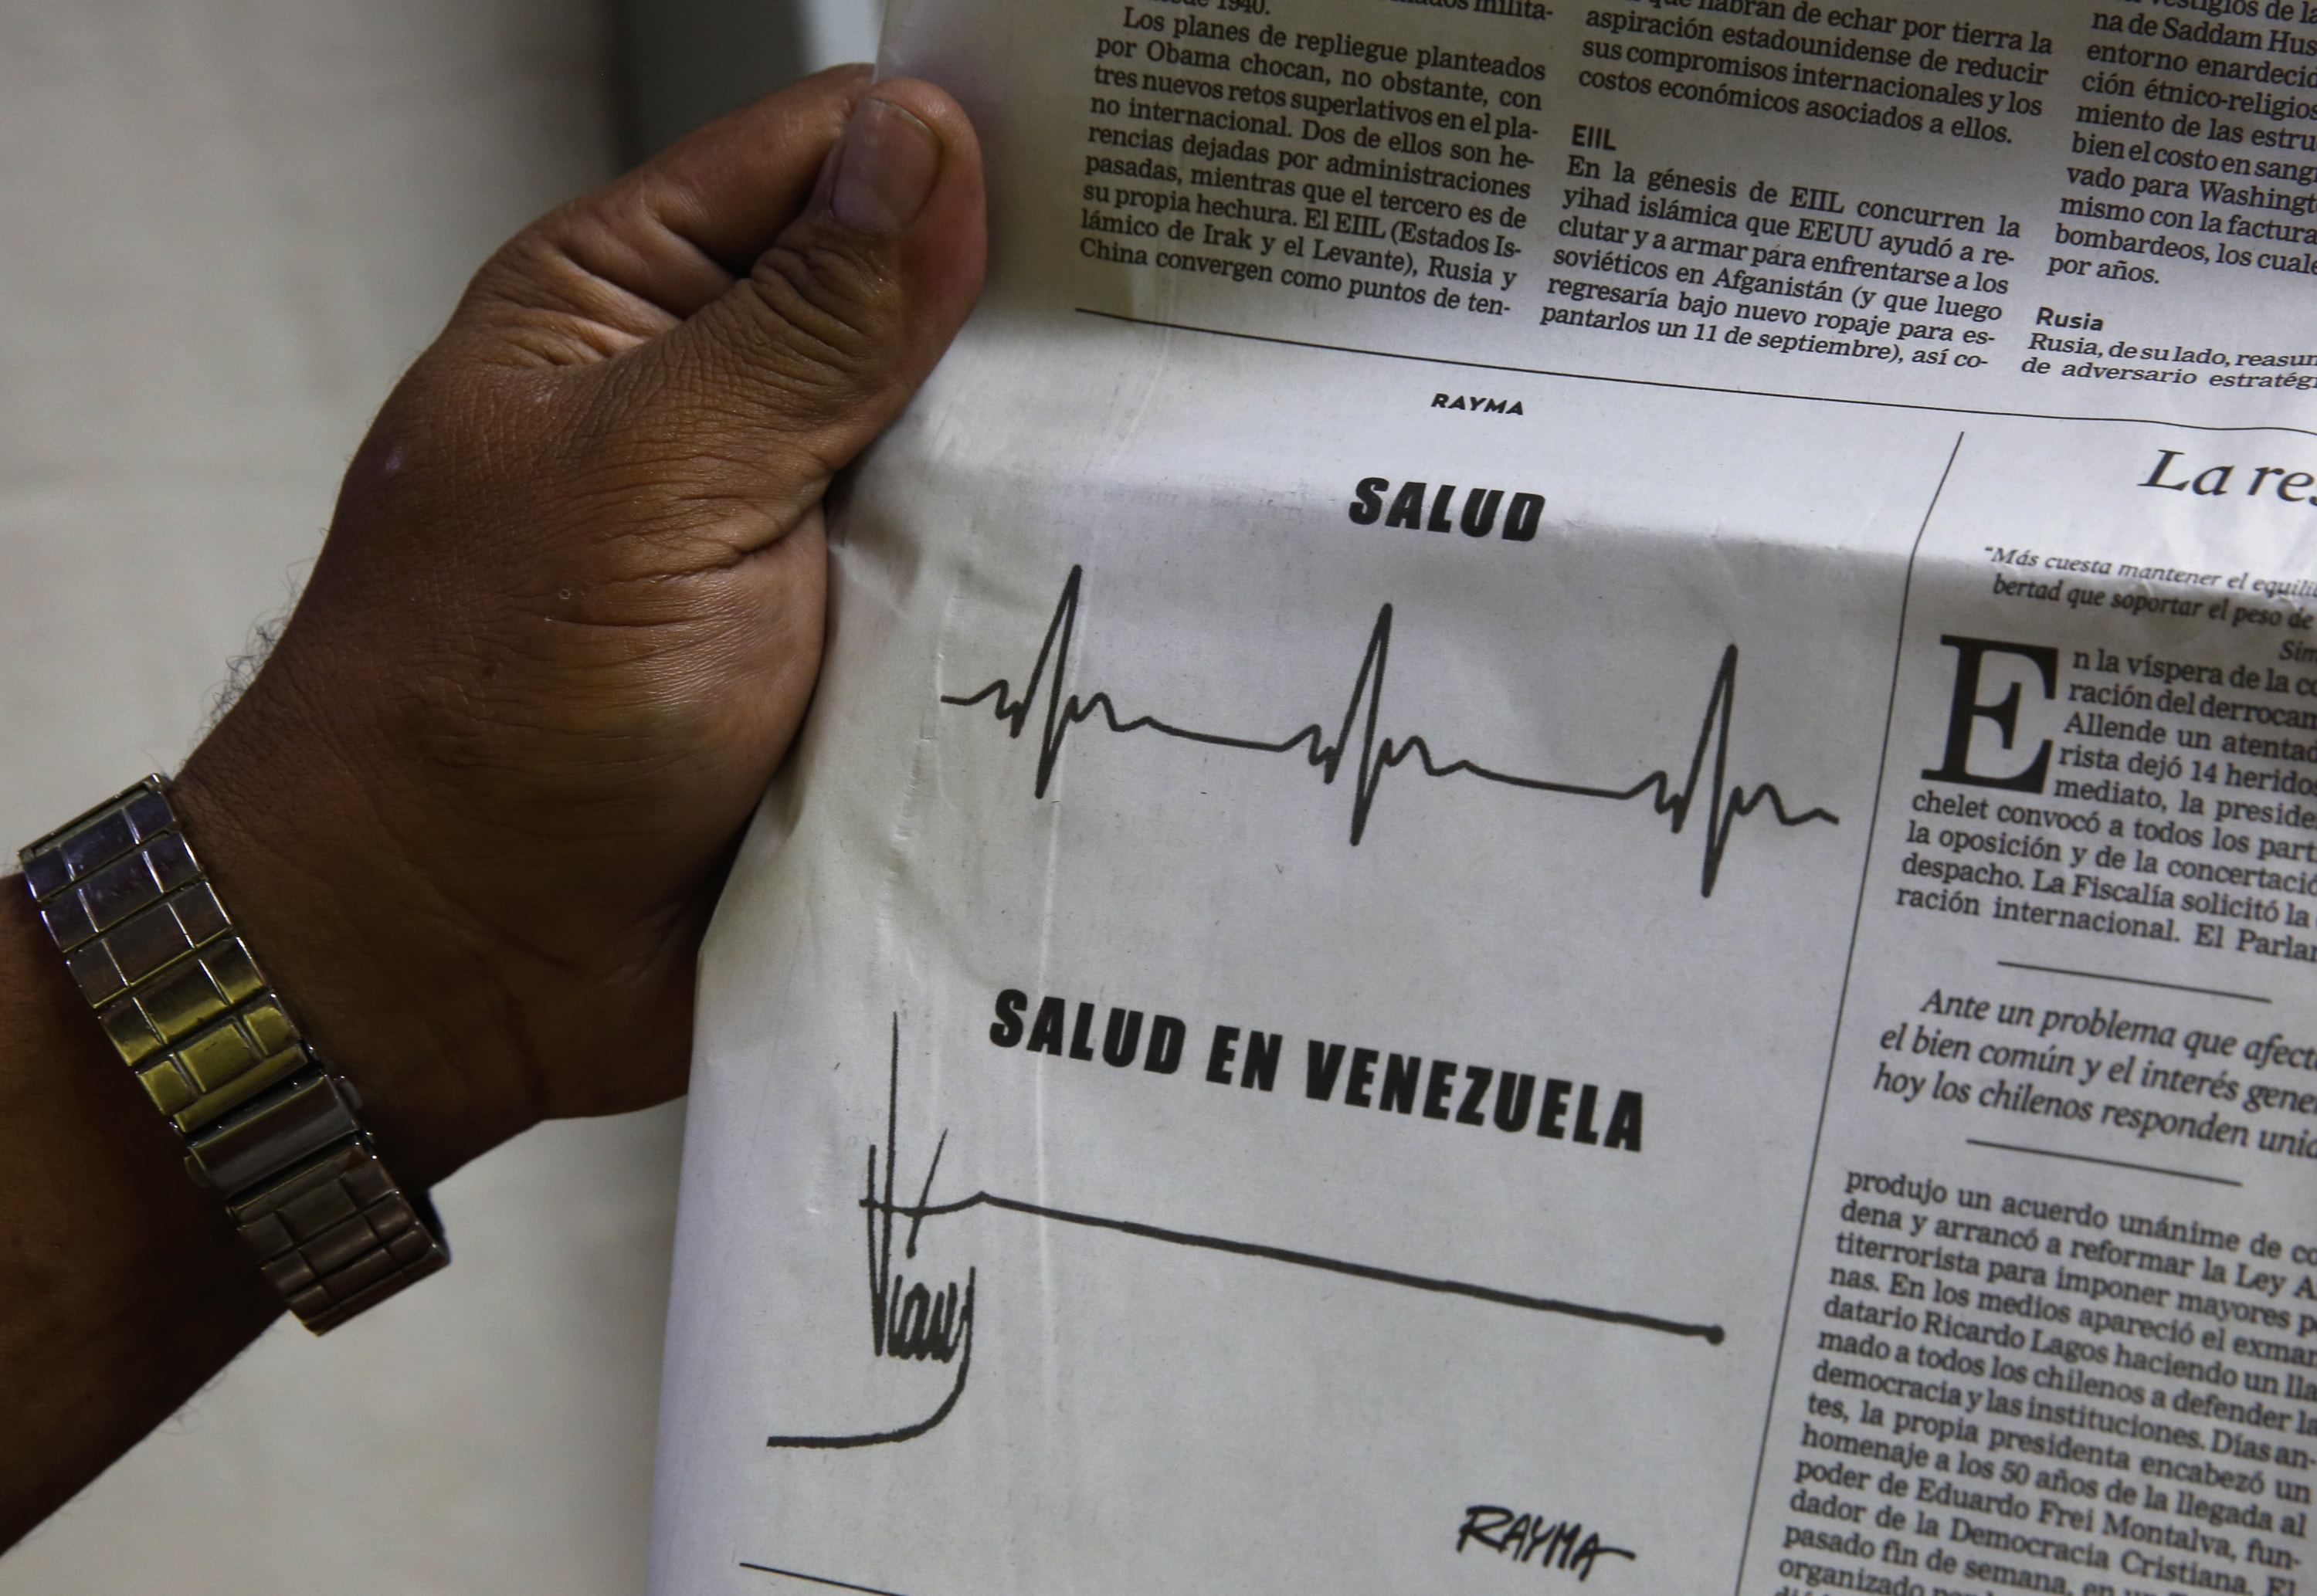 A man shows a cartoon by cartoonist Rayma Suprani, as he holds a newspaper in Caracas September 18, 2014, REUTERS/Carlos Garcia Rawlins